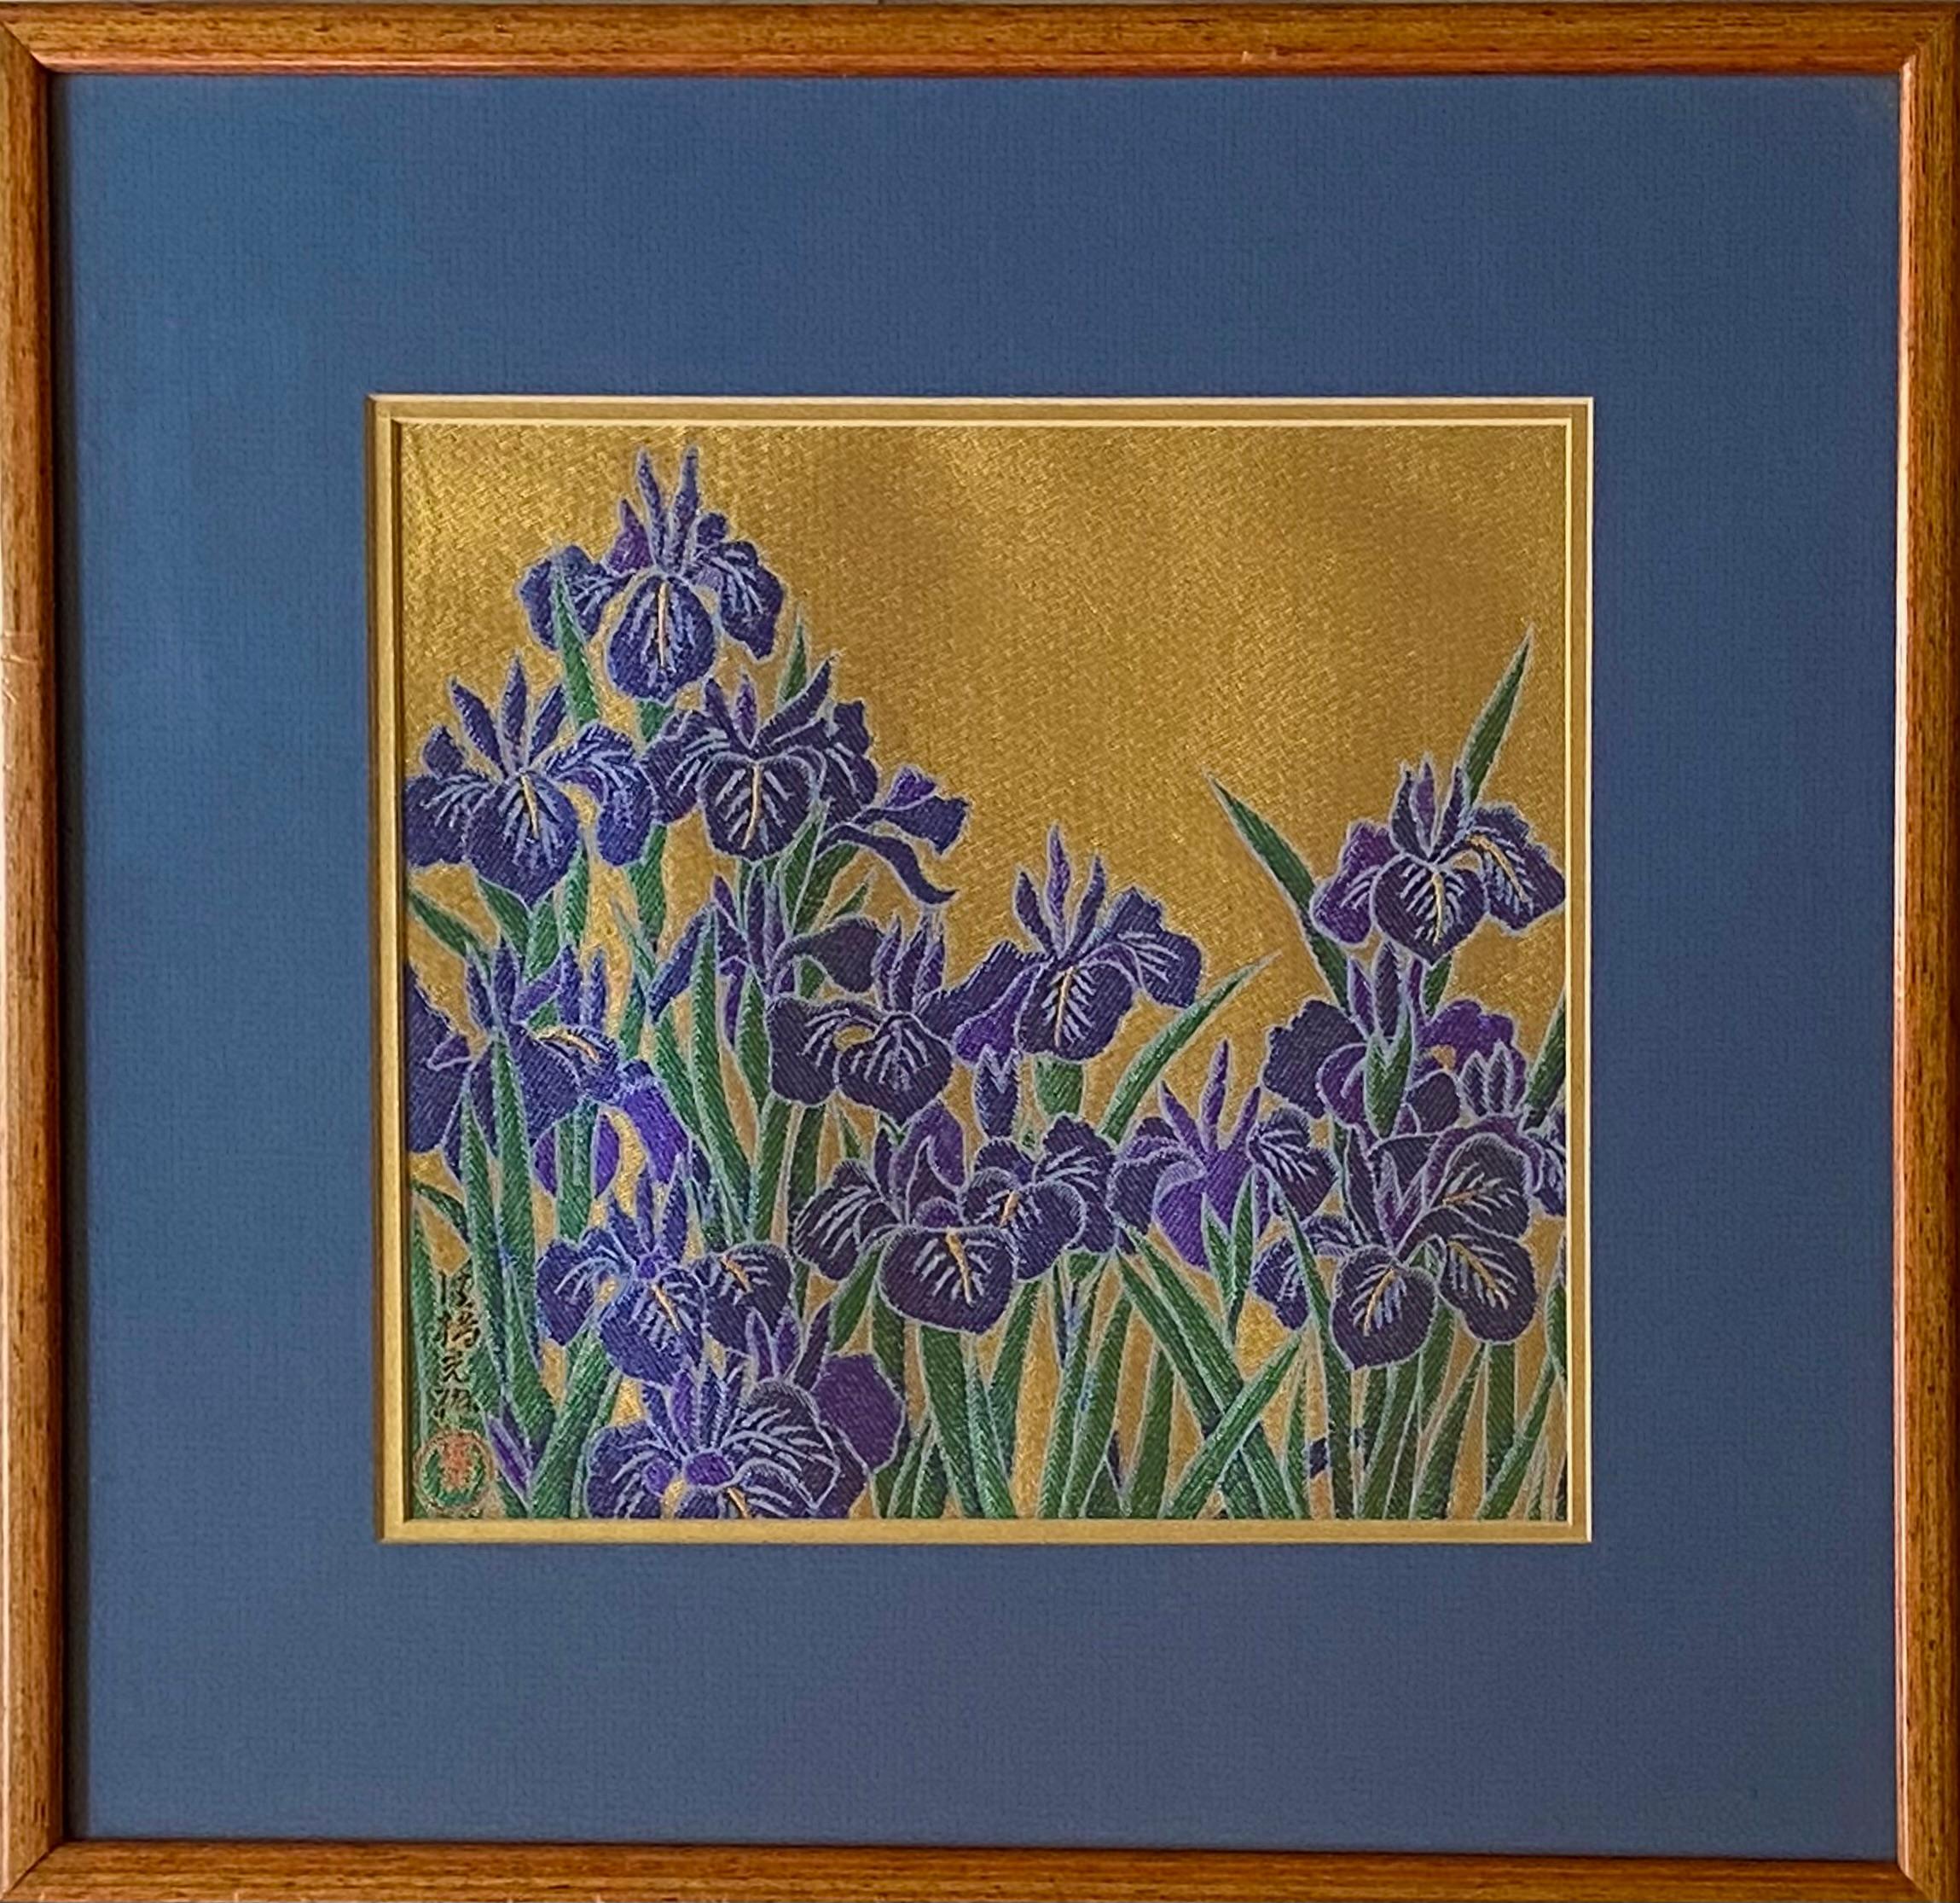 Beautifully executed cross stitch chinese embroidery of a field of irises. Artist red seal lower left with calligraphy above. Condition is excellent. Circa 1990. Artist unknown. Under glass. The artwork is double matted with a thin multicolored wood